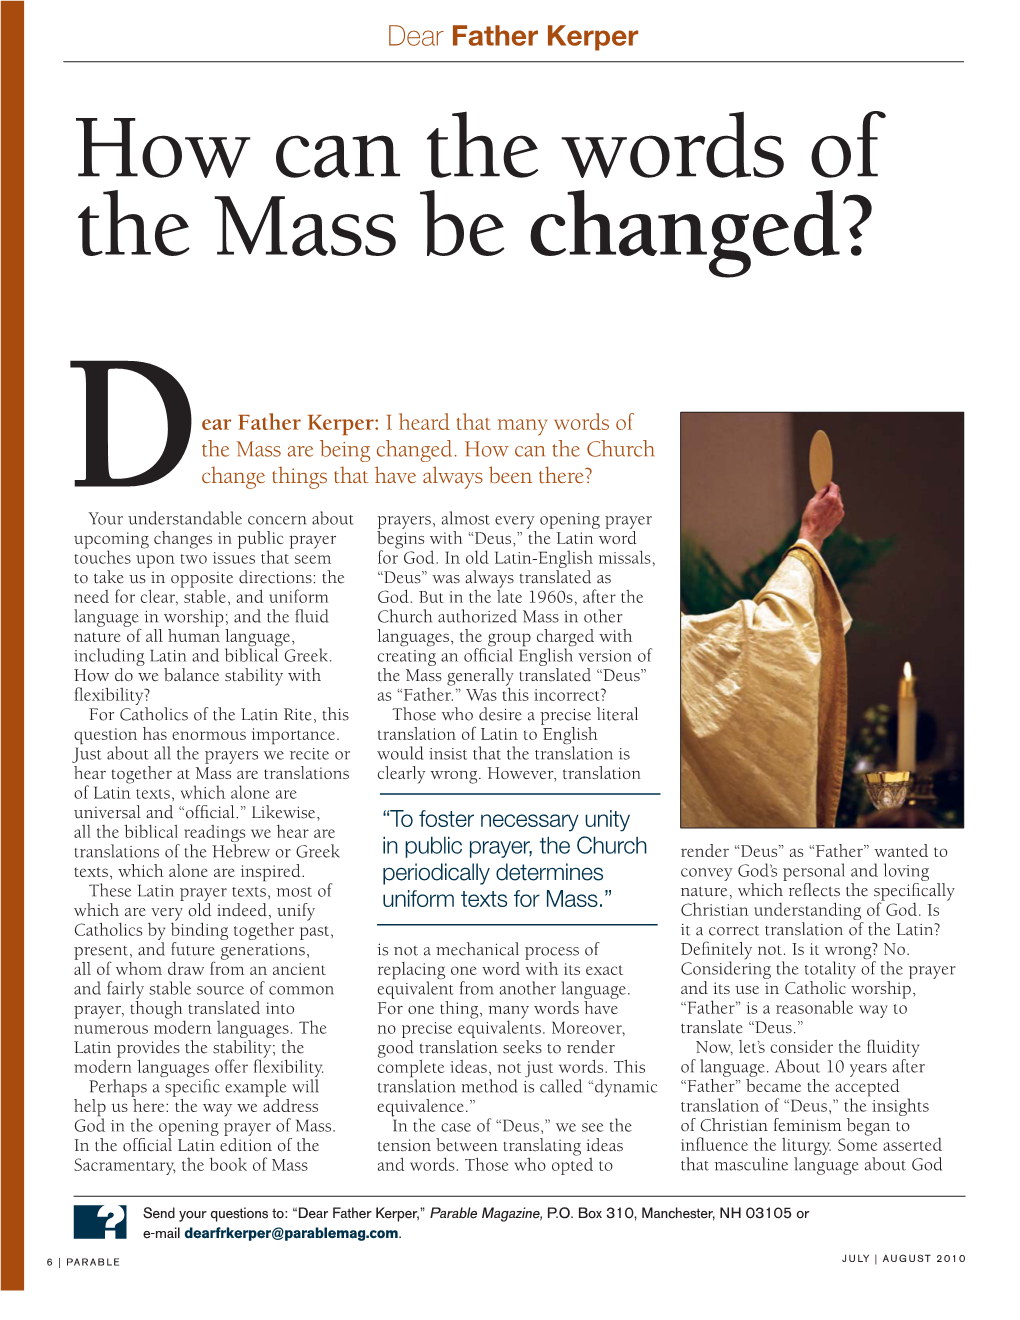 How Can the Words of the Mass Be Changed?